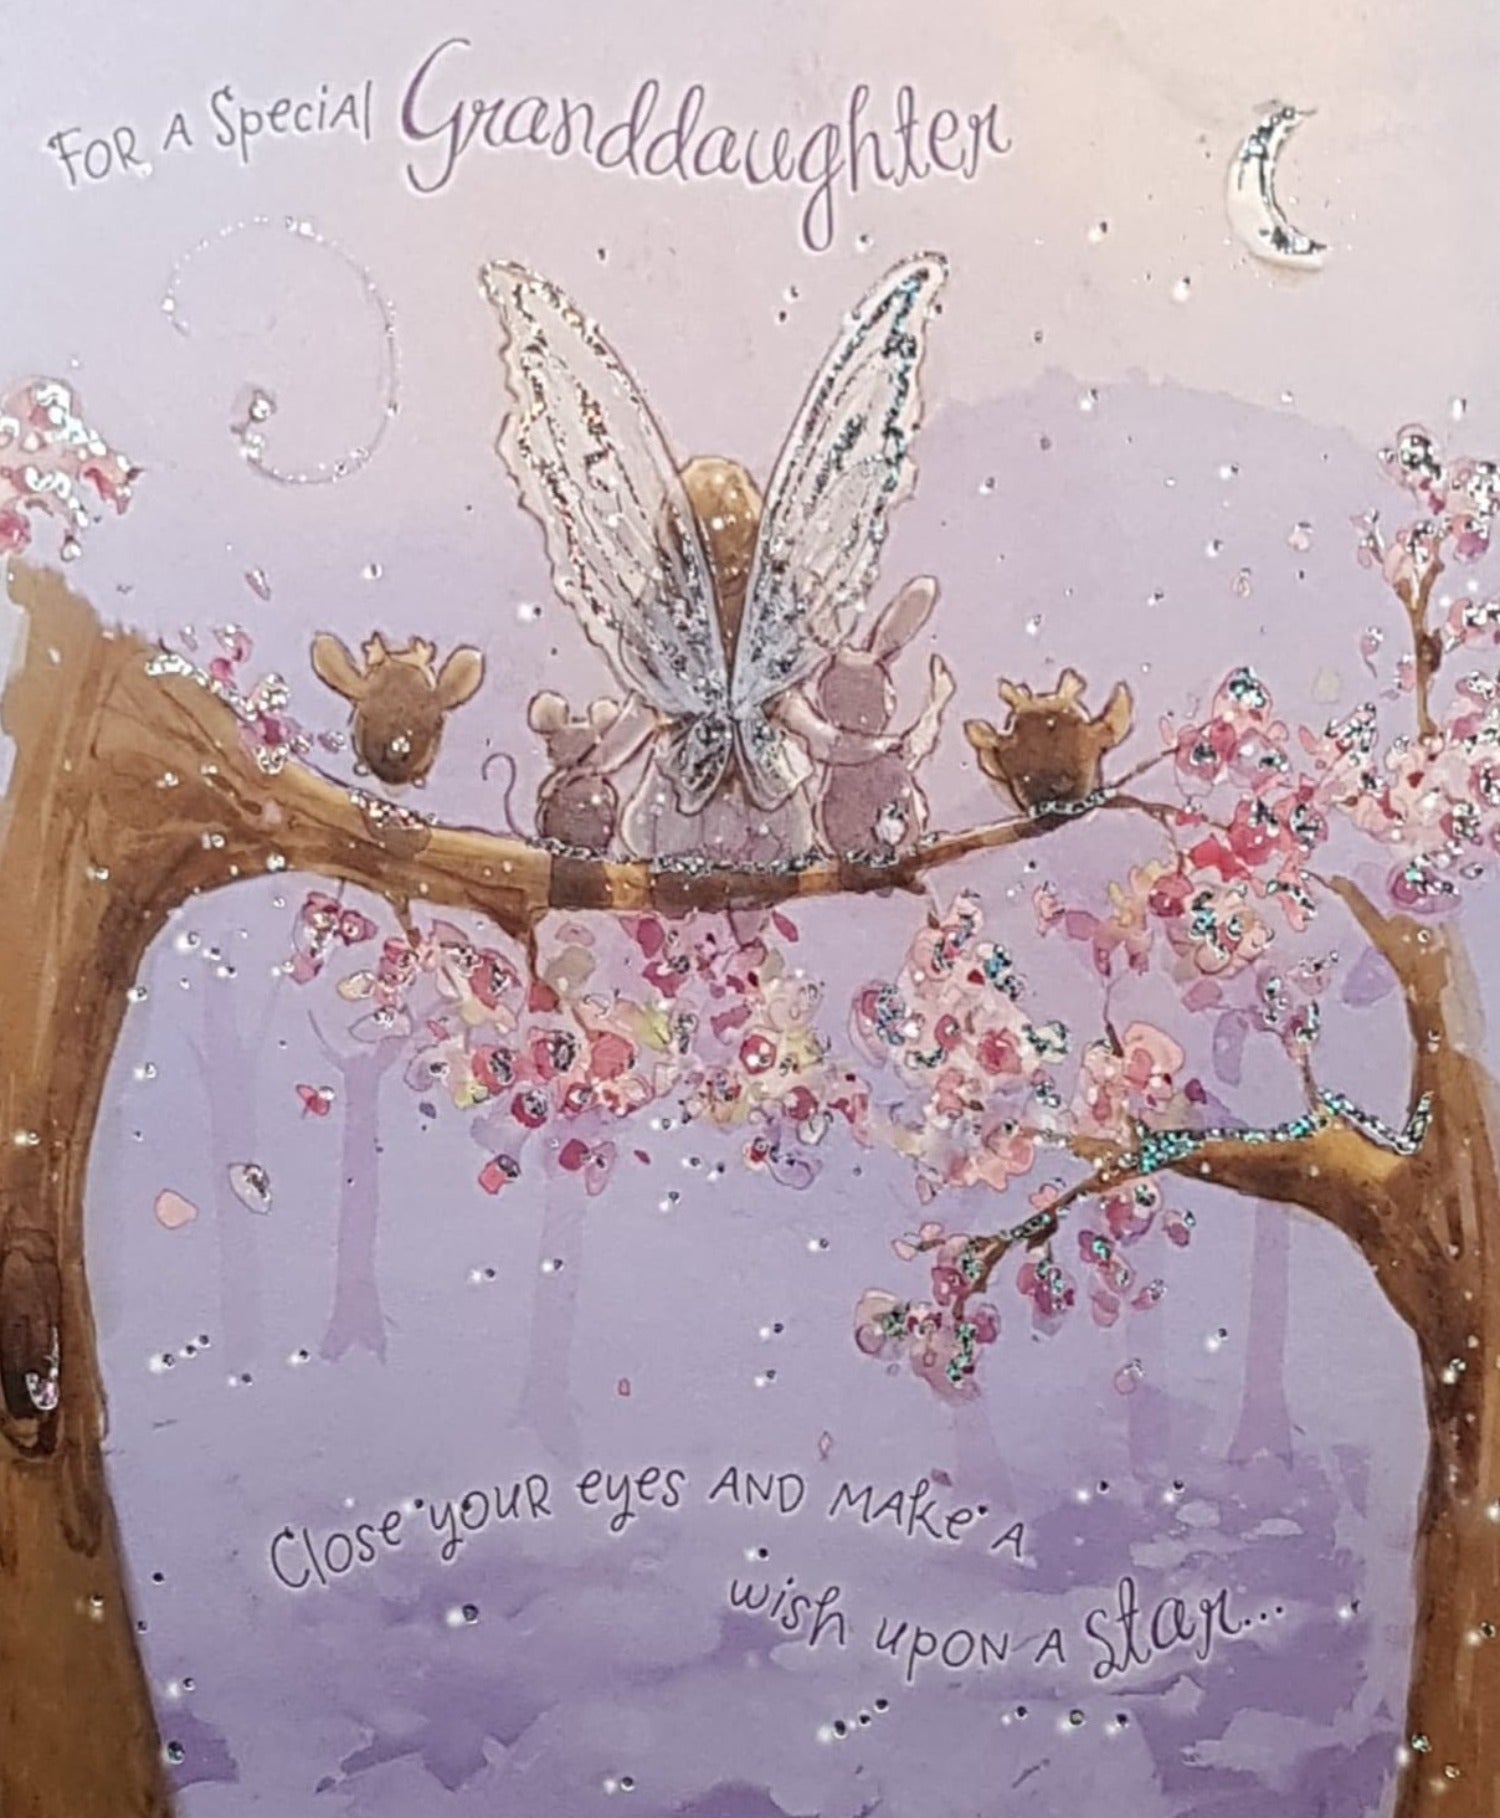 Birthday Card - Granddaughter / Fairy Sitting On The Branch With The Animal Friends